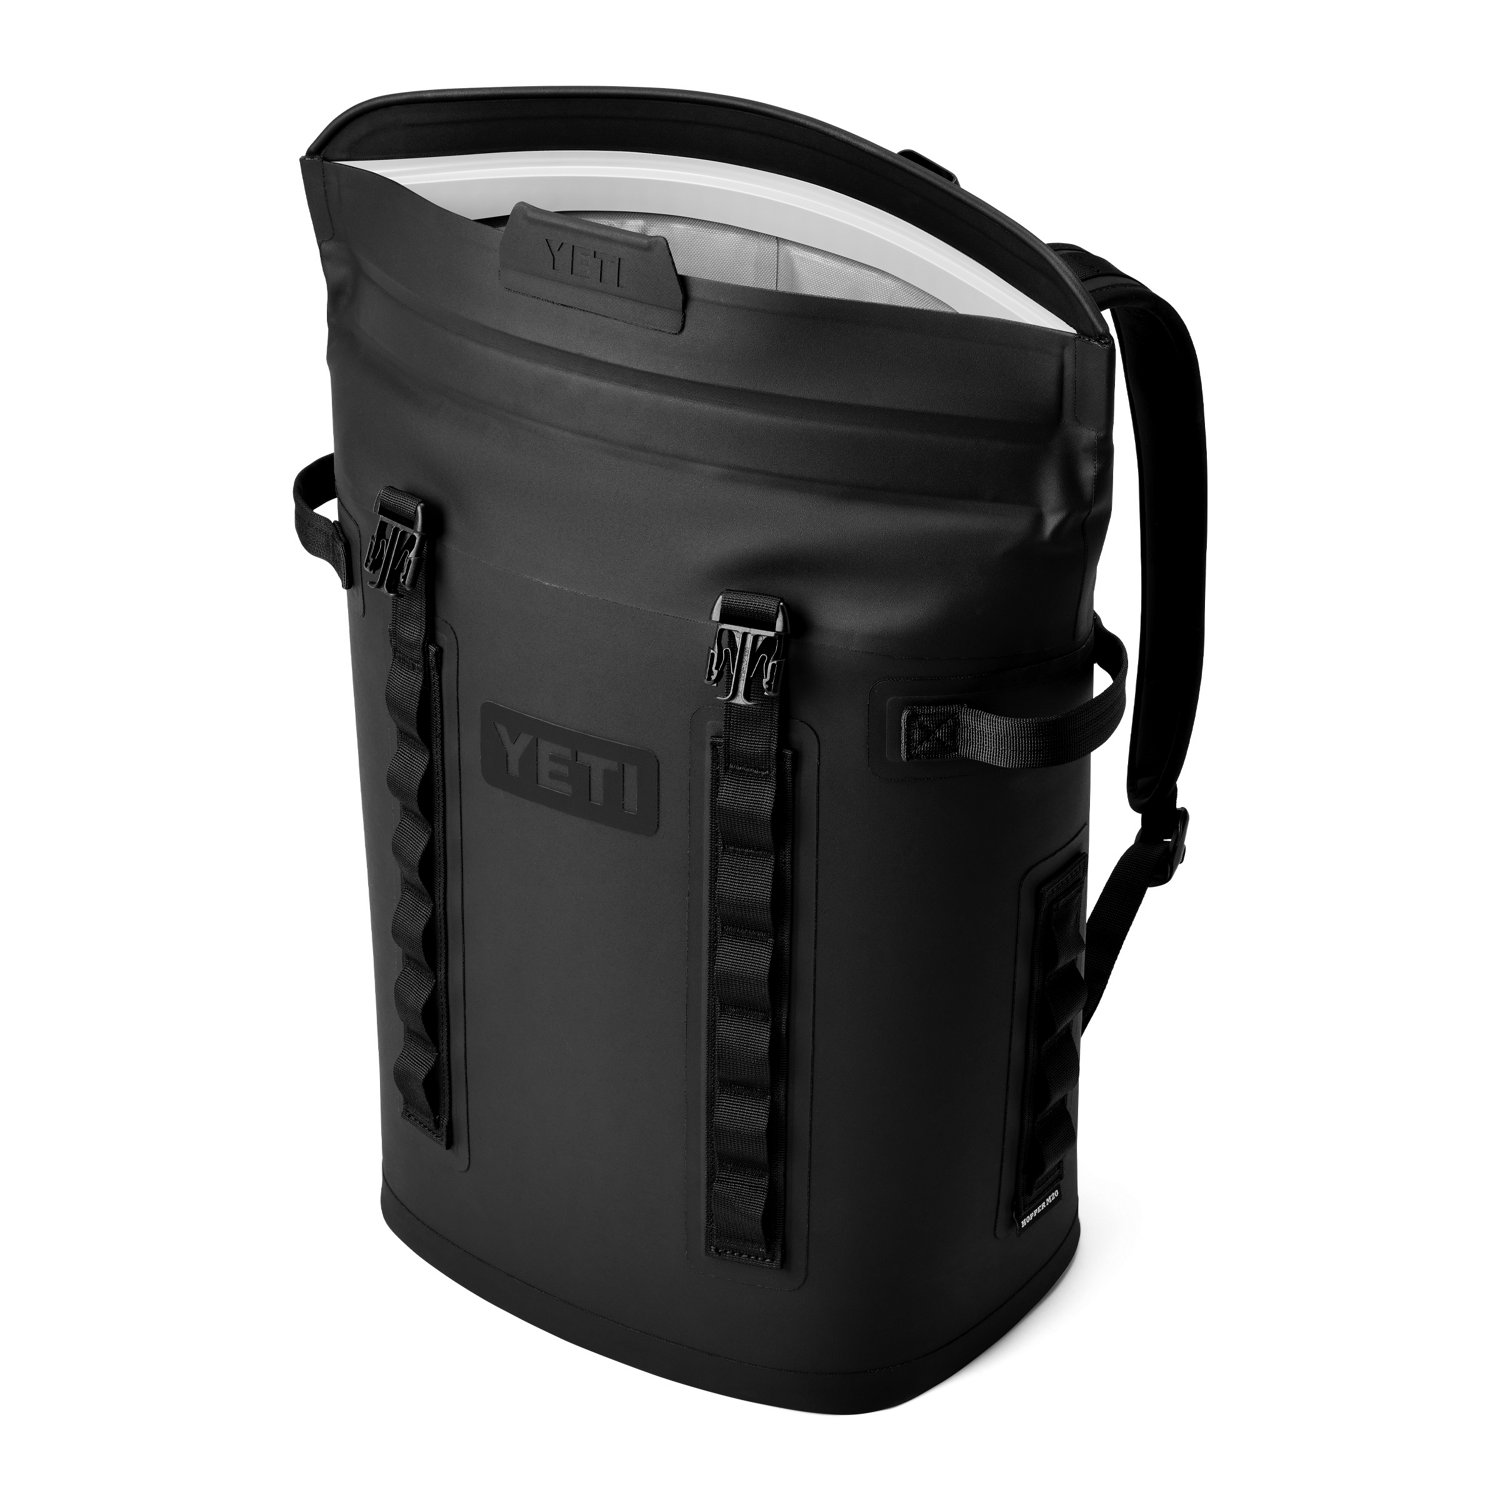 https://academy.scene7.com/is/image/academy//coolers/yeti-hopper-backpack-m20-20-soft-cooler-18060131272-black/b564e50d0ba44866bf0b9d0260bd91cb?$pdp-mobile-gallery-ng$